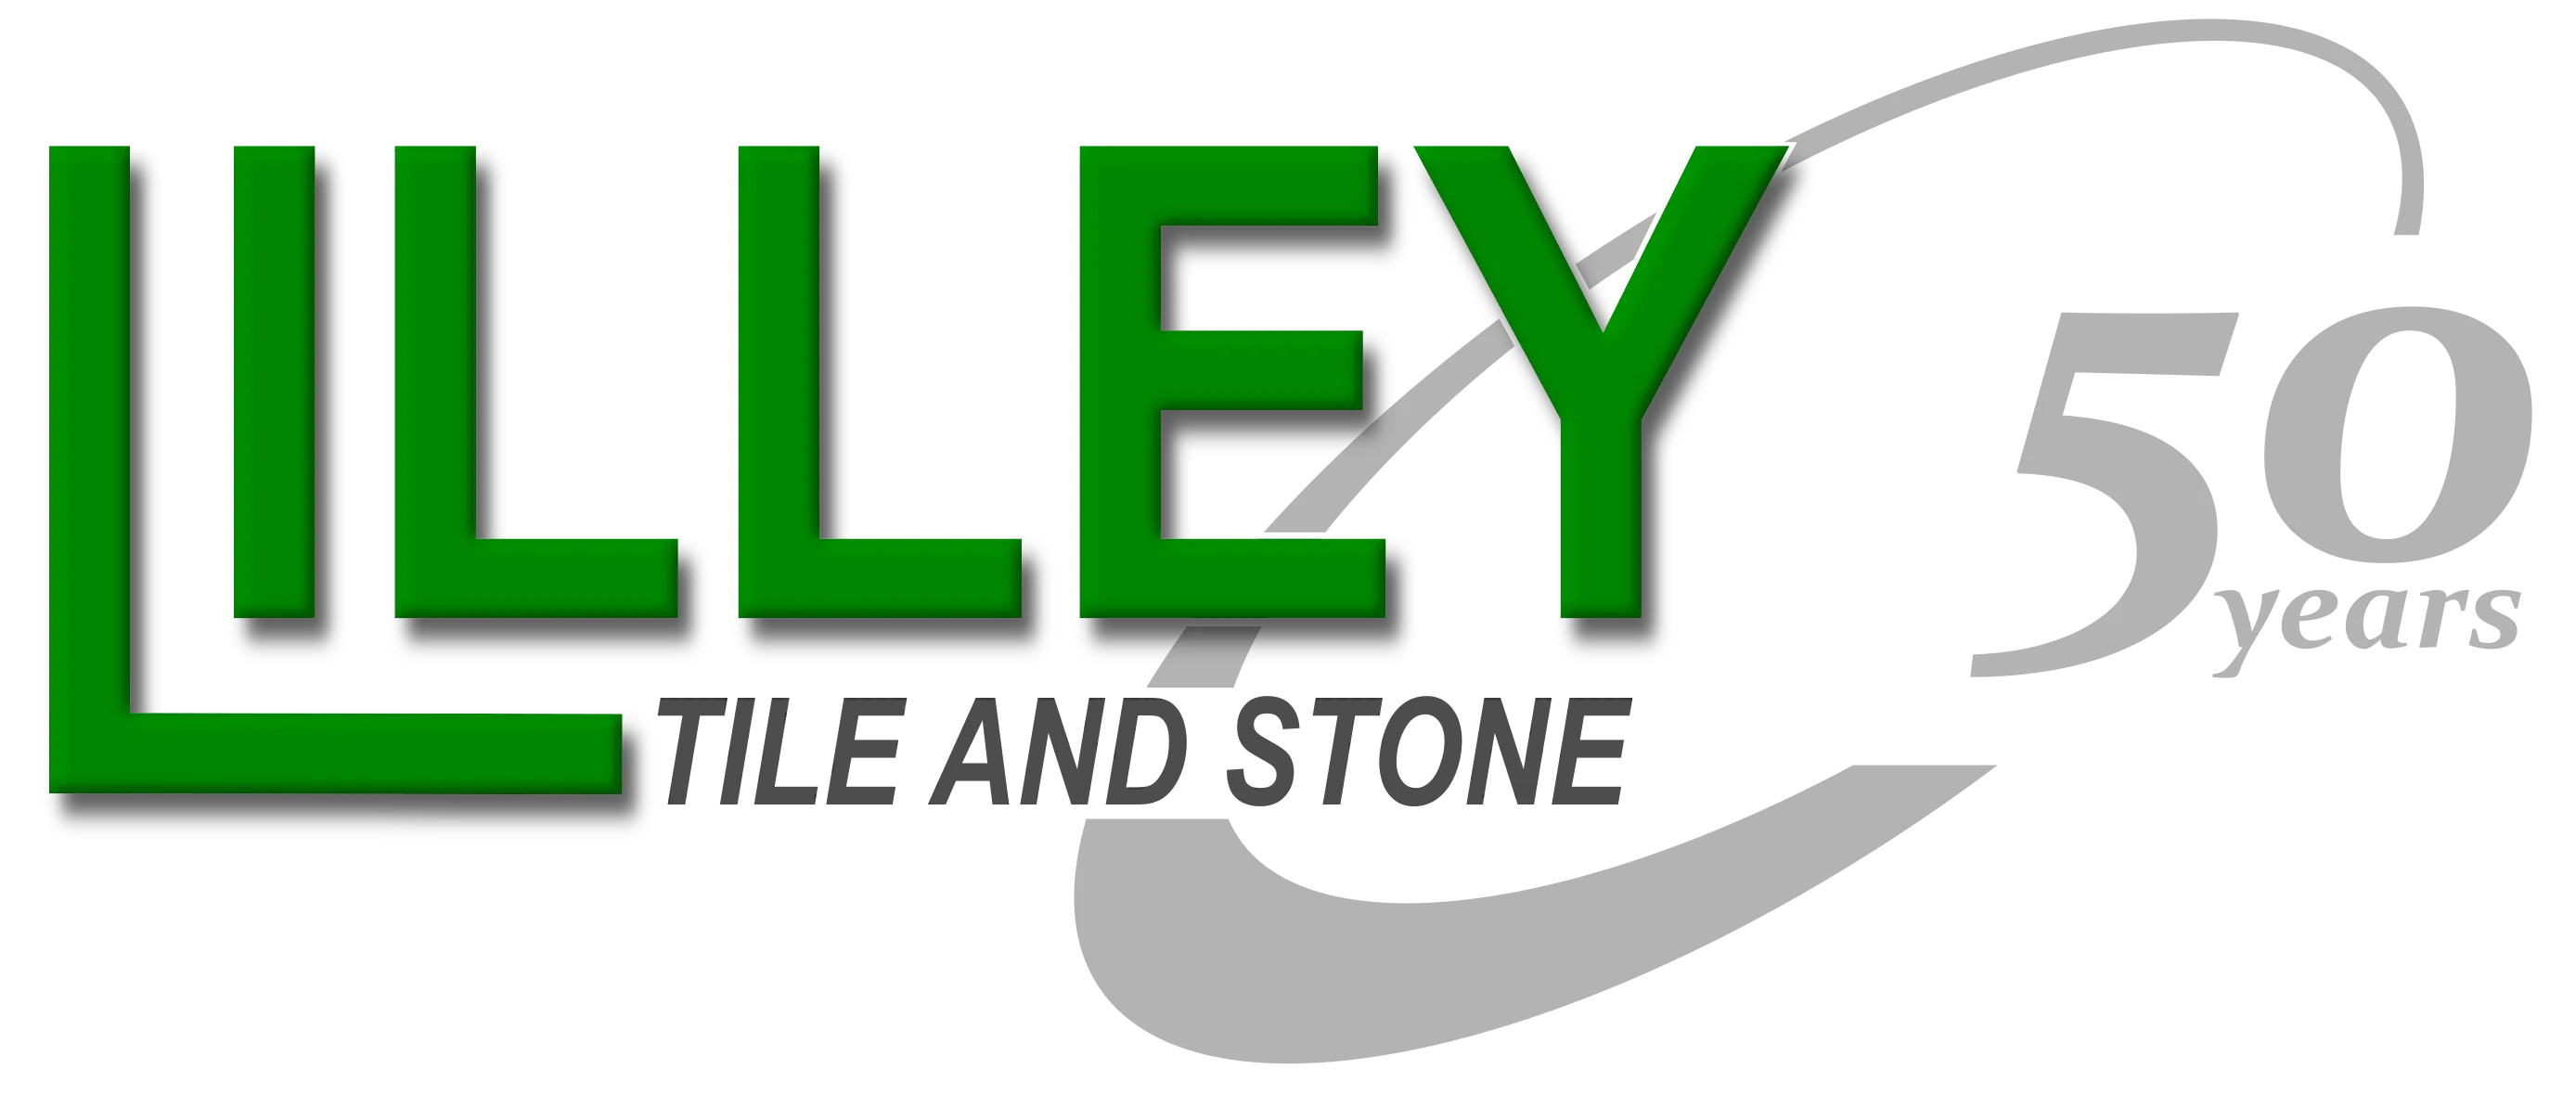  Lilley Tile And Stone Promo Code